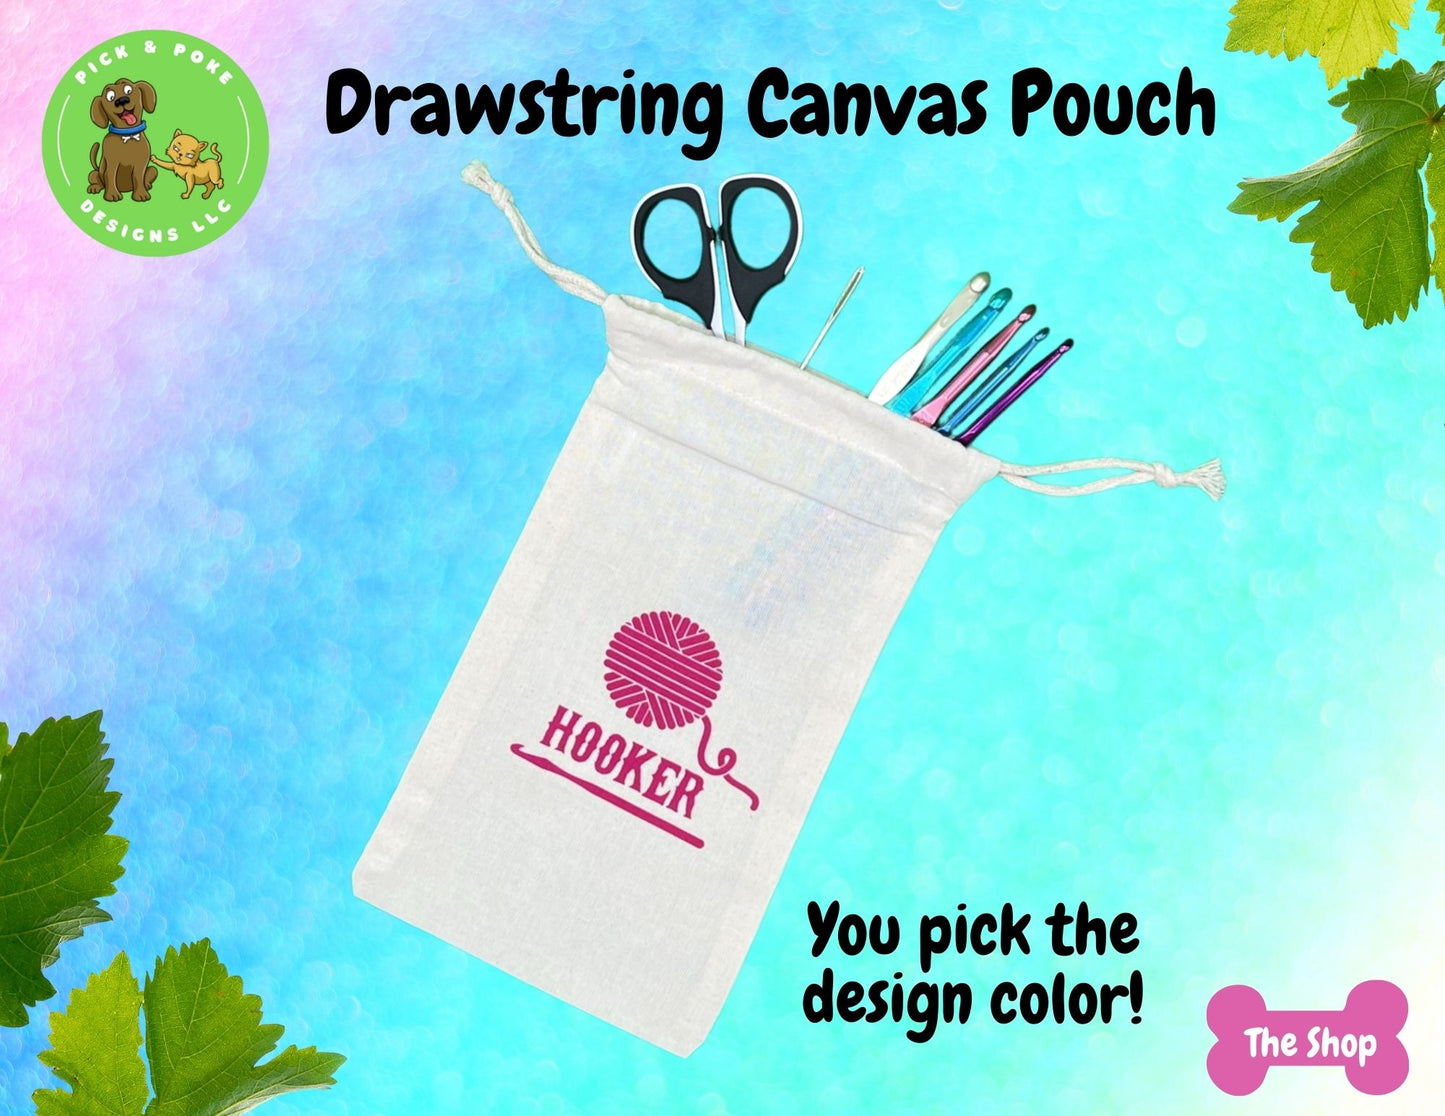 Crochet Hooker Drawstring Canvas Pouch (Custom Made) | Store crochet supplies or use as a gift bag for friends and family who craft!